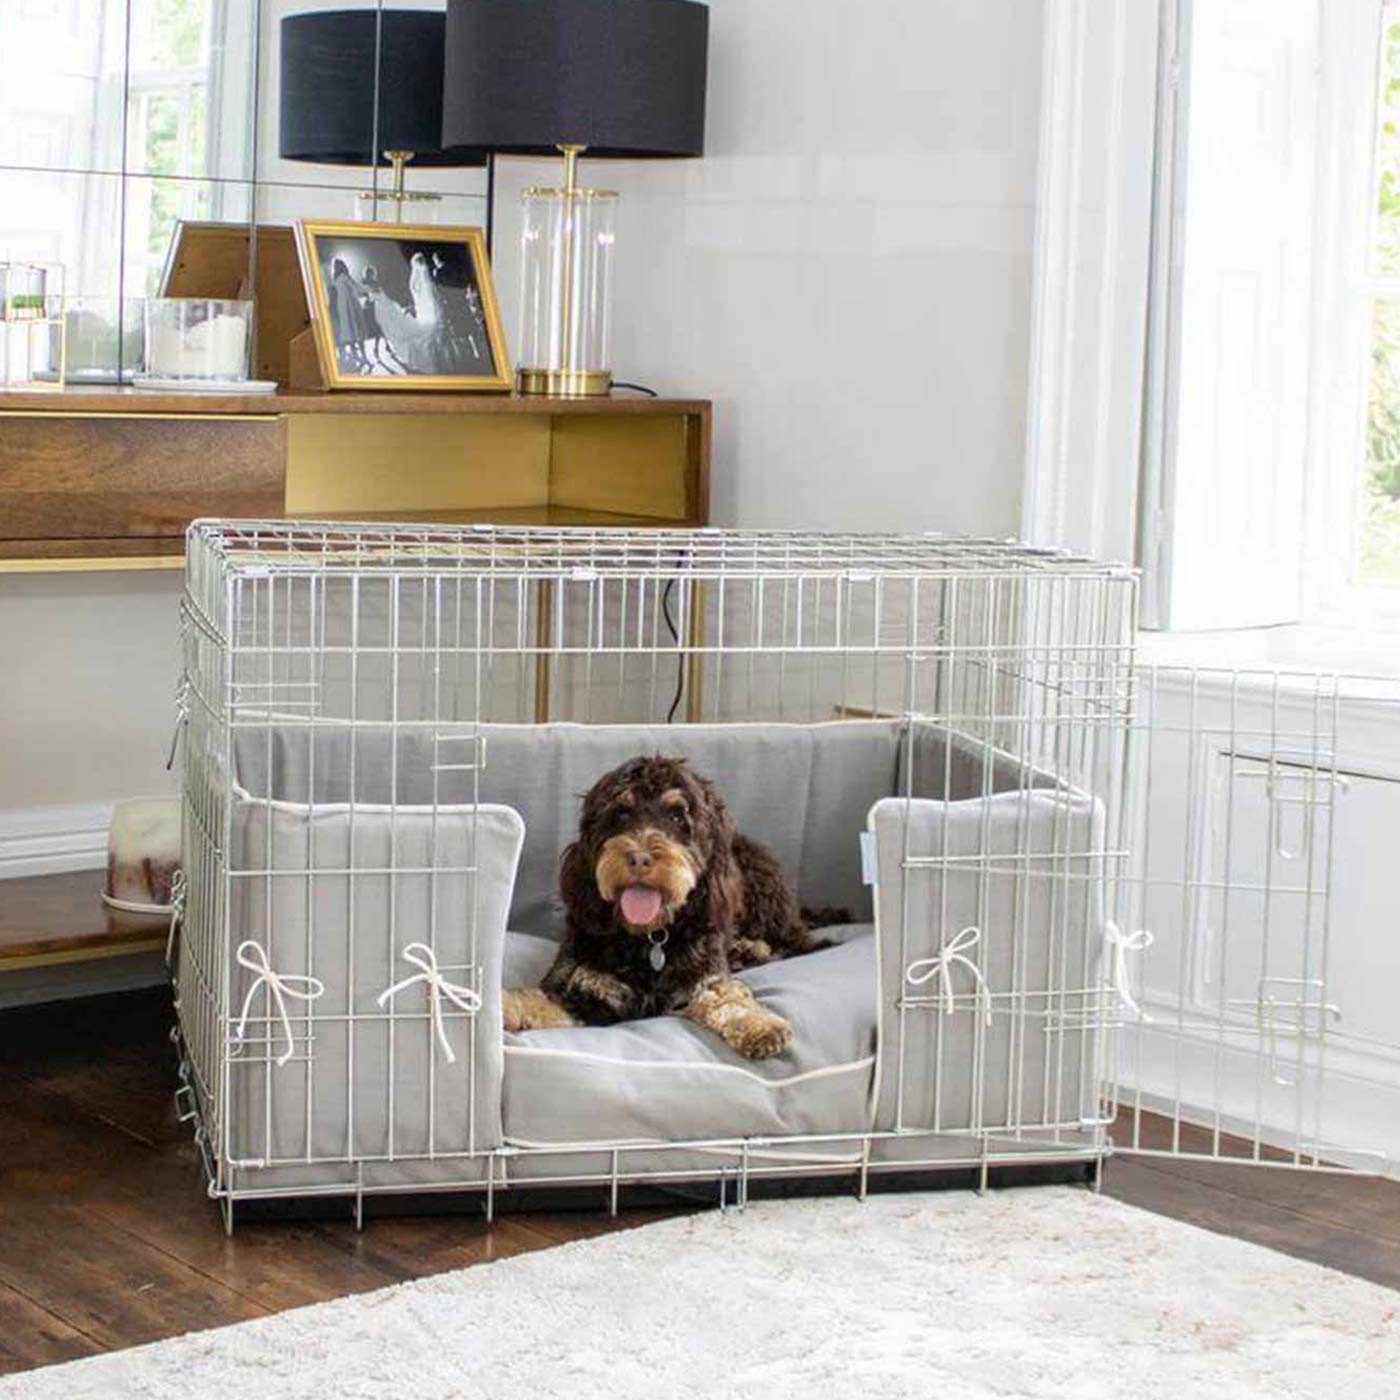 Dog Crate Bumper in Savanna Stone by Lords & Labradors